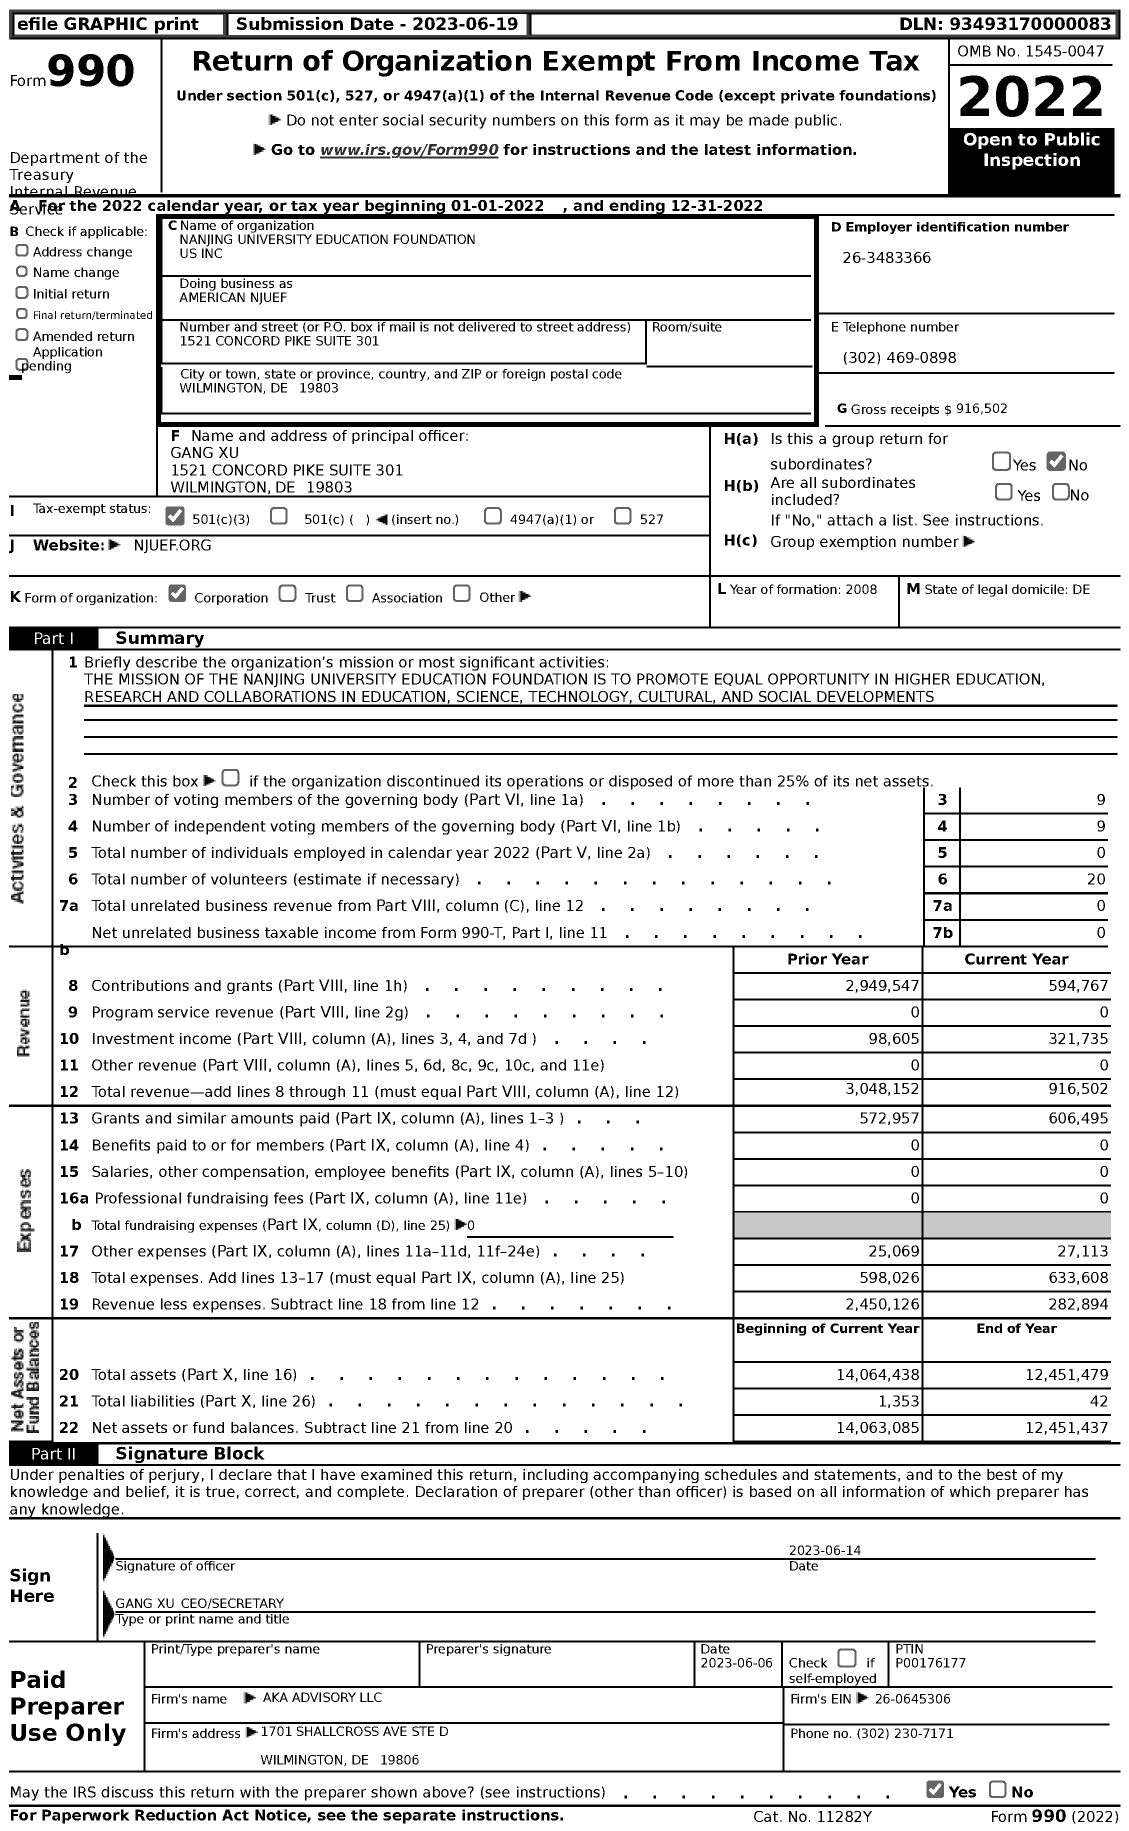 Image of first page of 2022 Form 990 for American Njuef